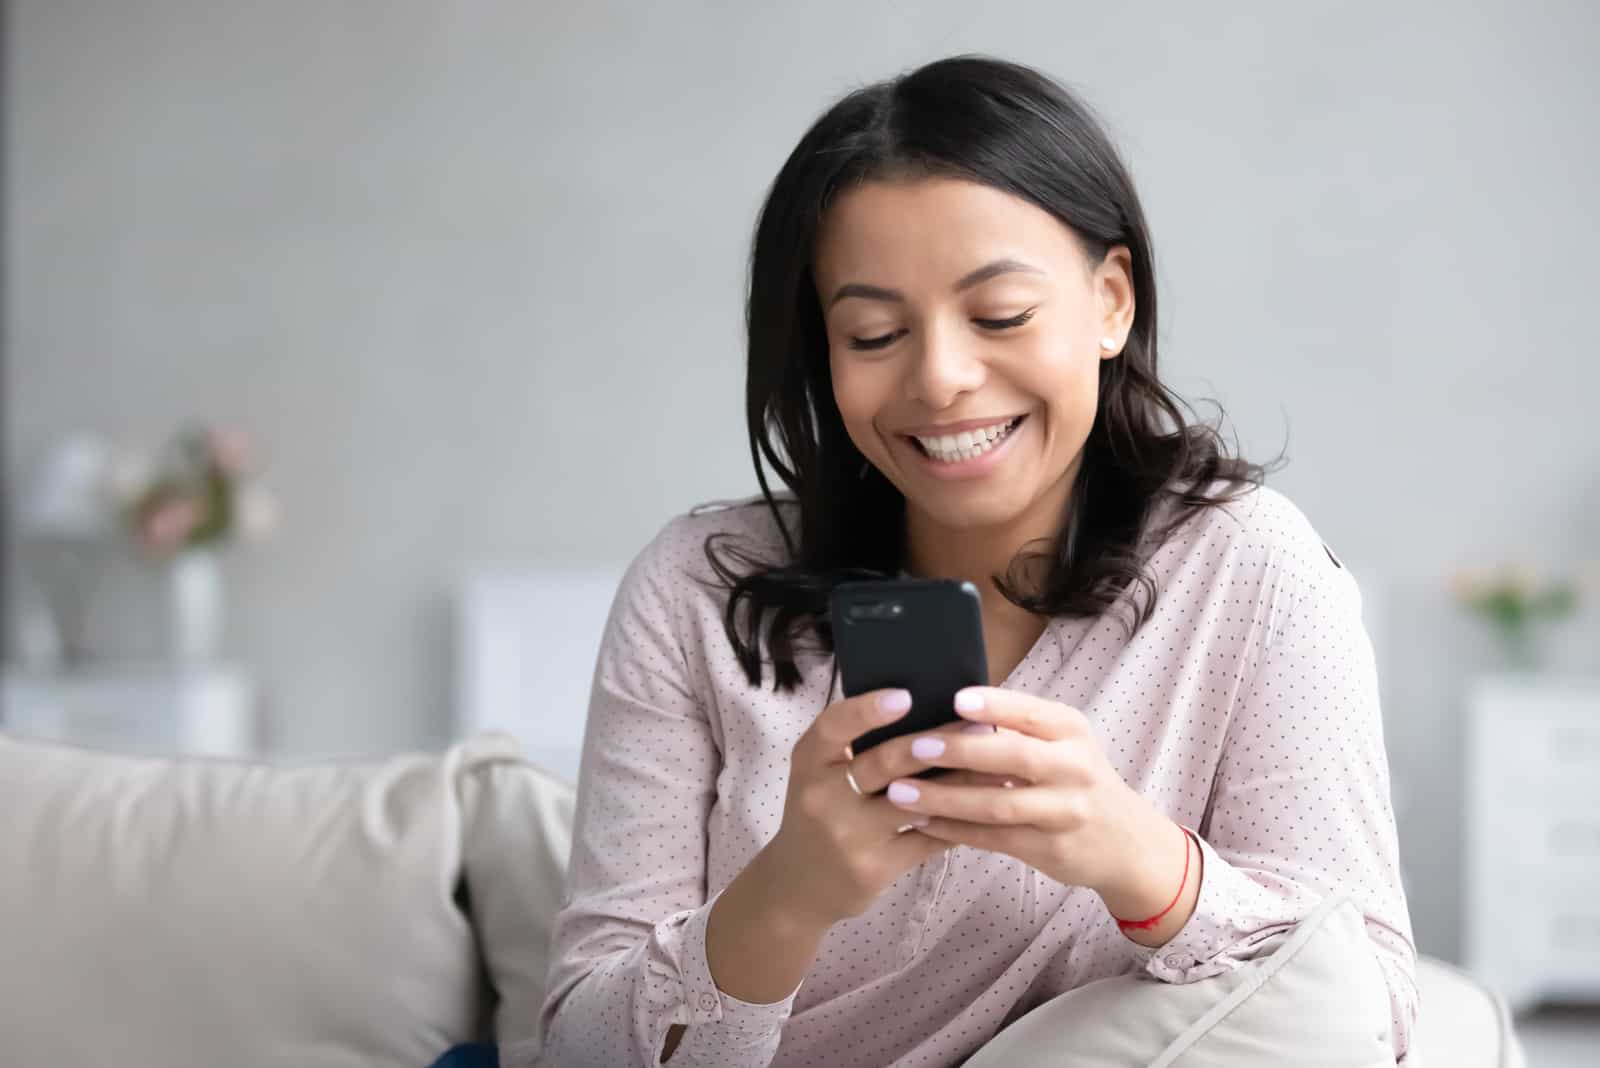 happy smiling woman sitting on sofa texting